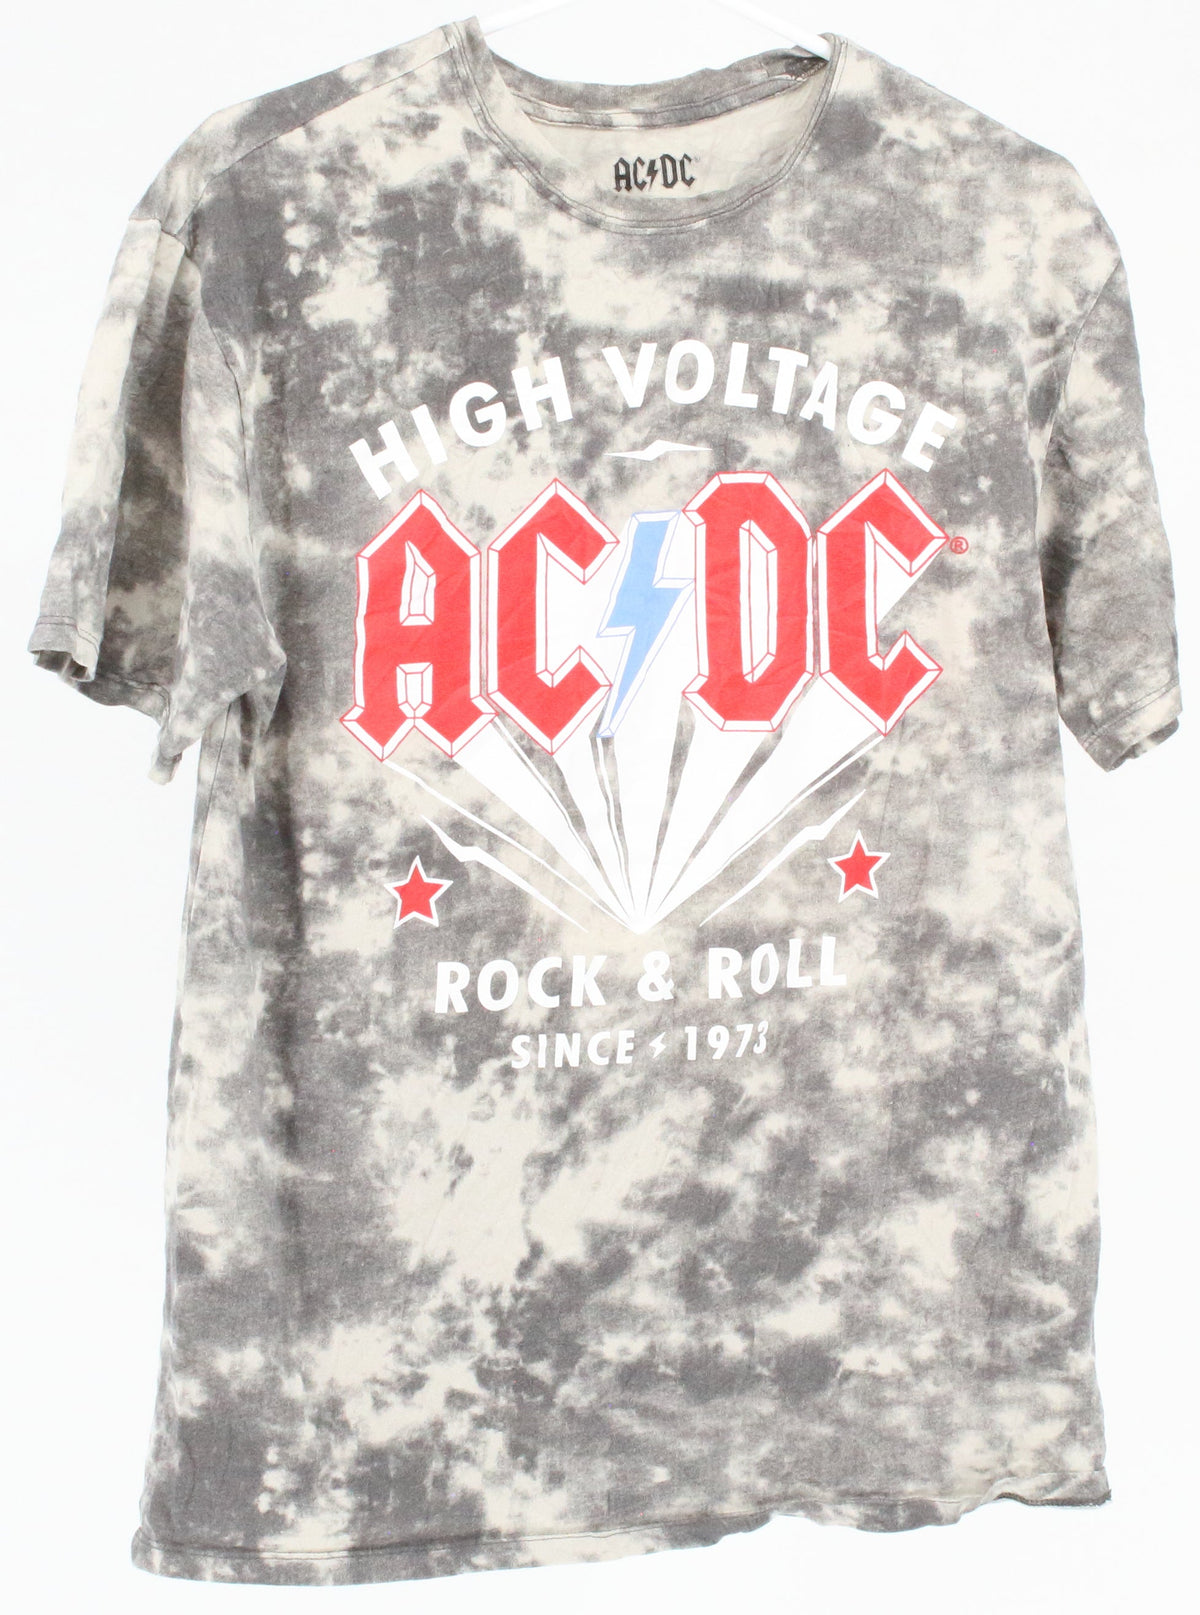 ACDC Grey Tie Dye High Voltage Rock n Roll Front Graphic Band Tee